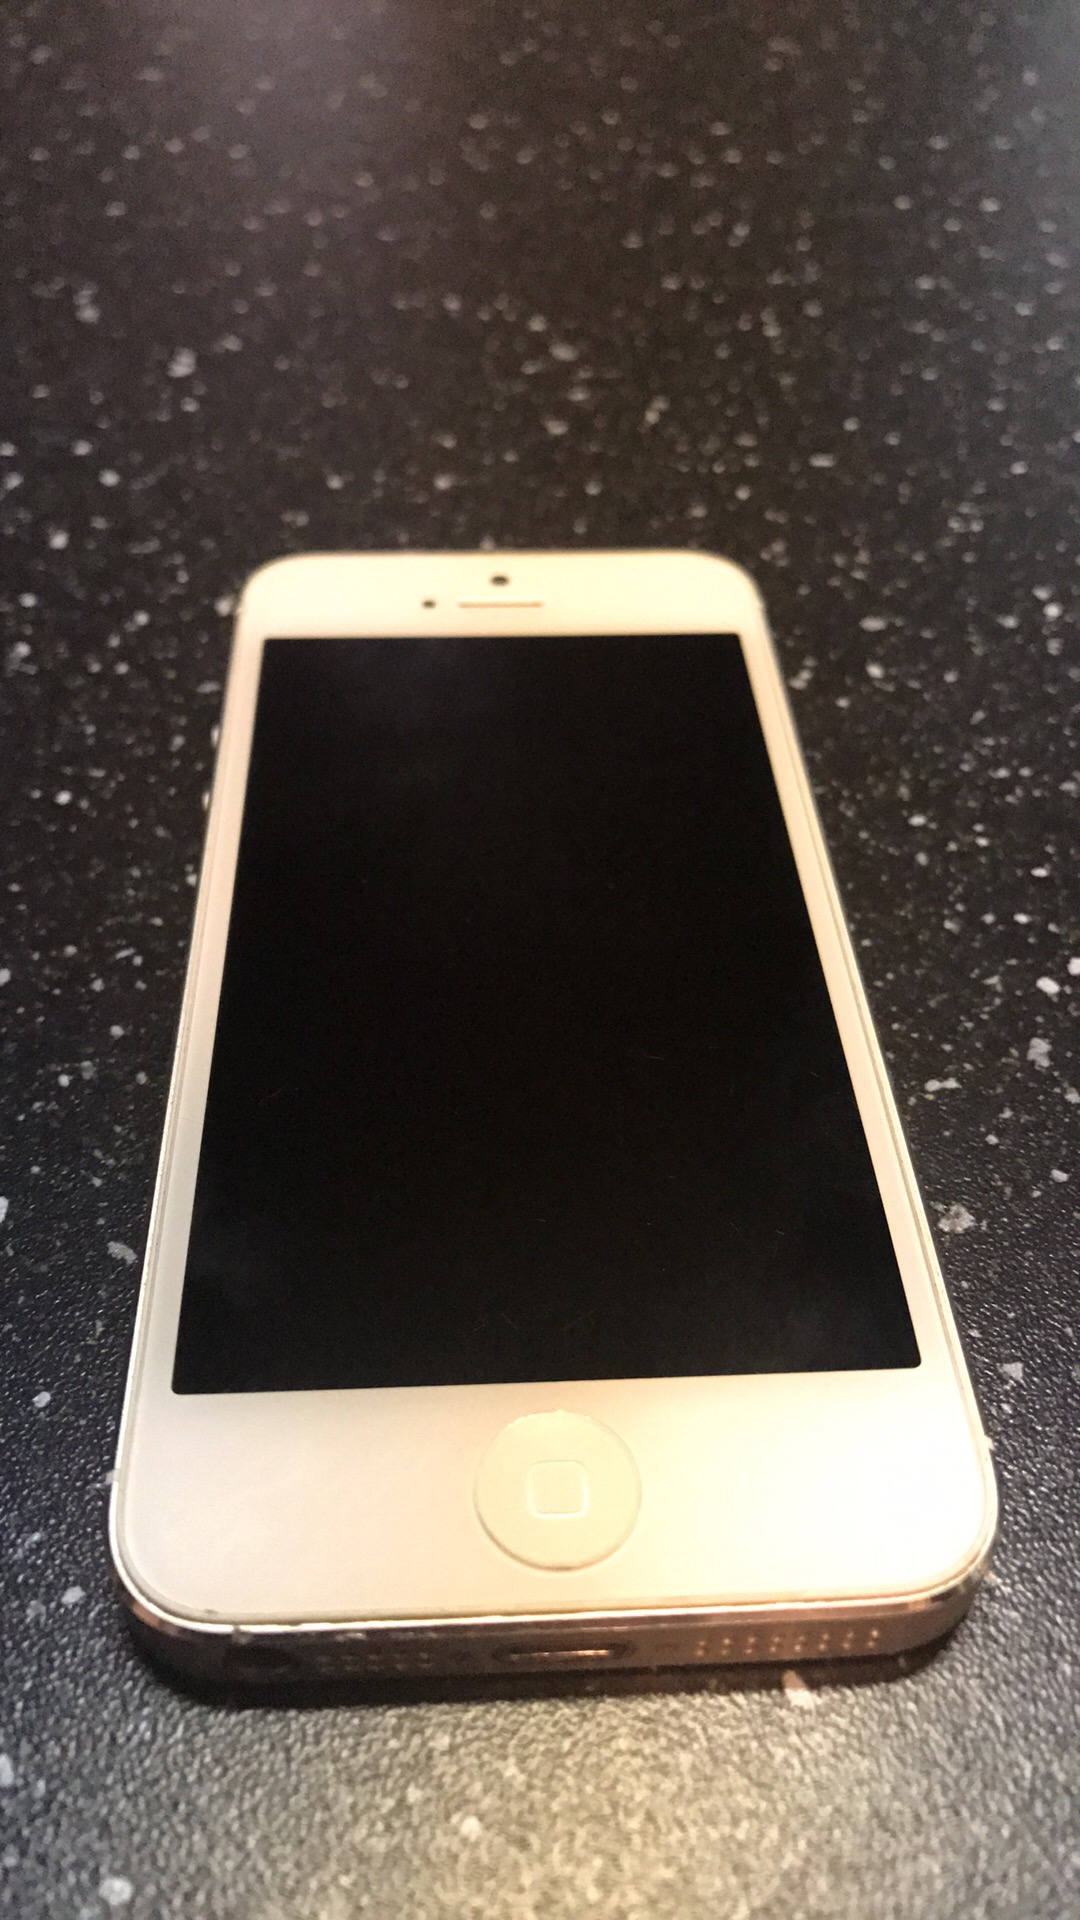 White iphone 5 32gb Unlocked for any carrier